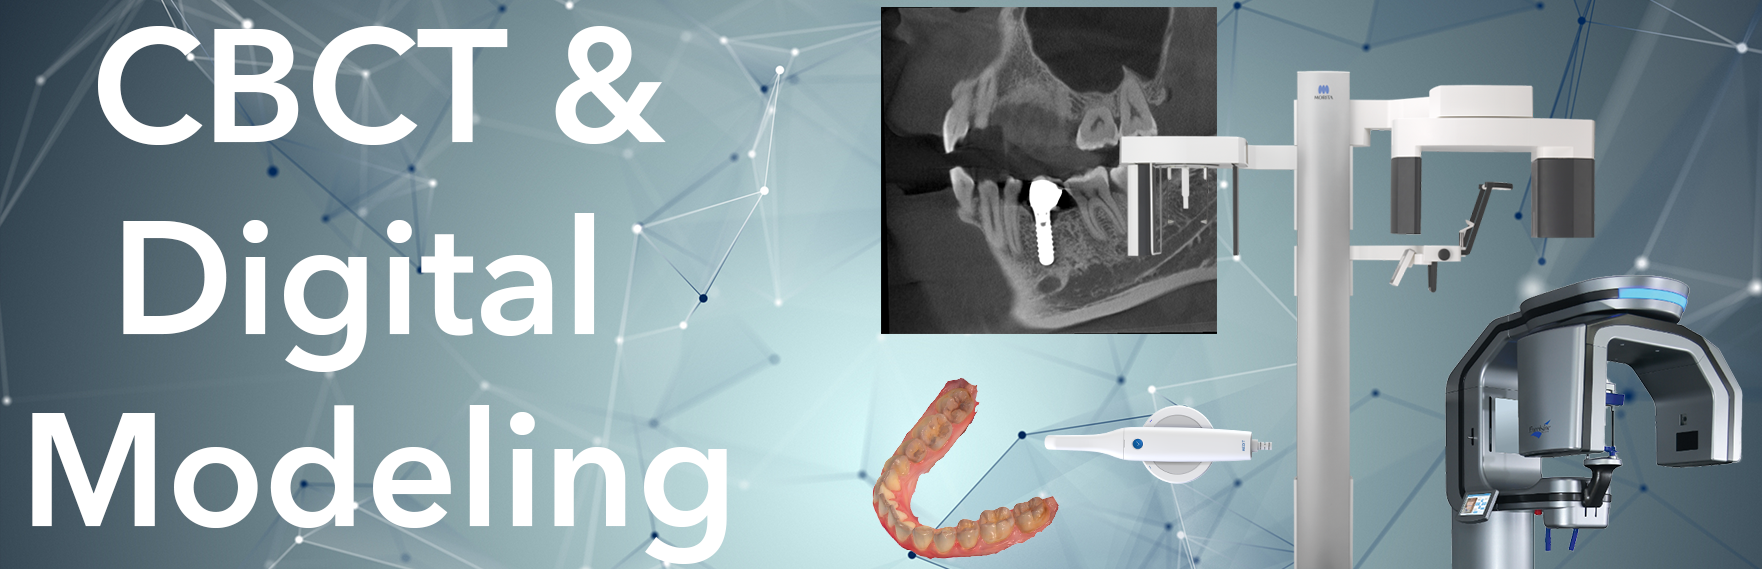 CBCT & Digital Imaging products offered by Dental TI. 